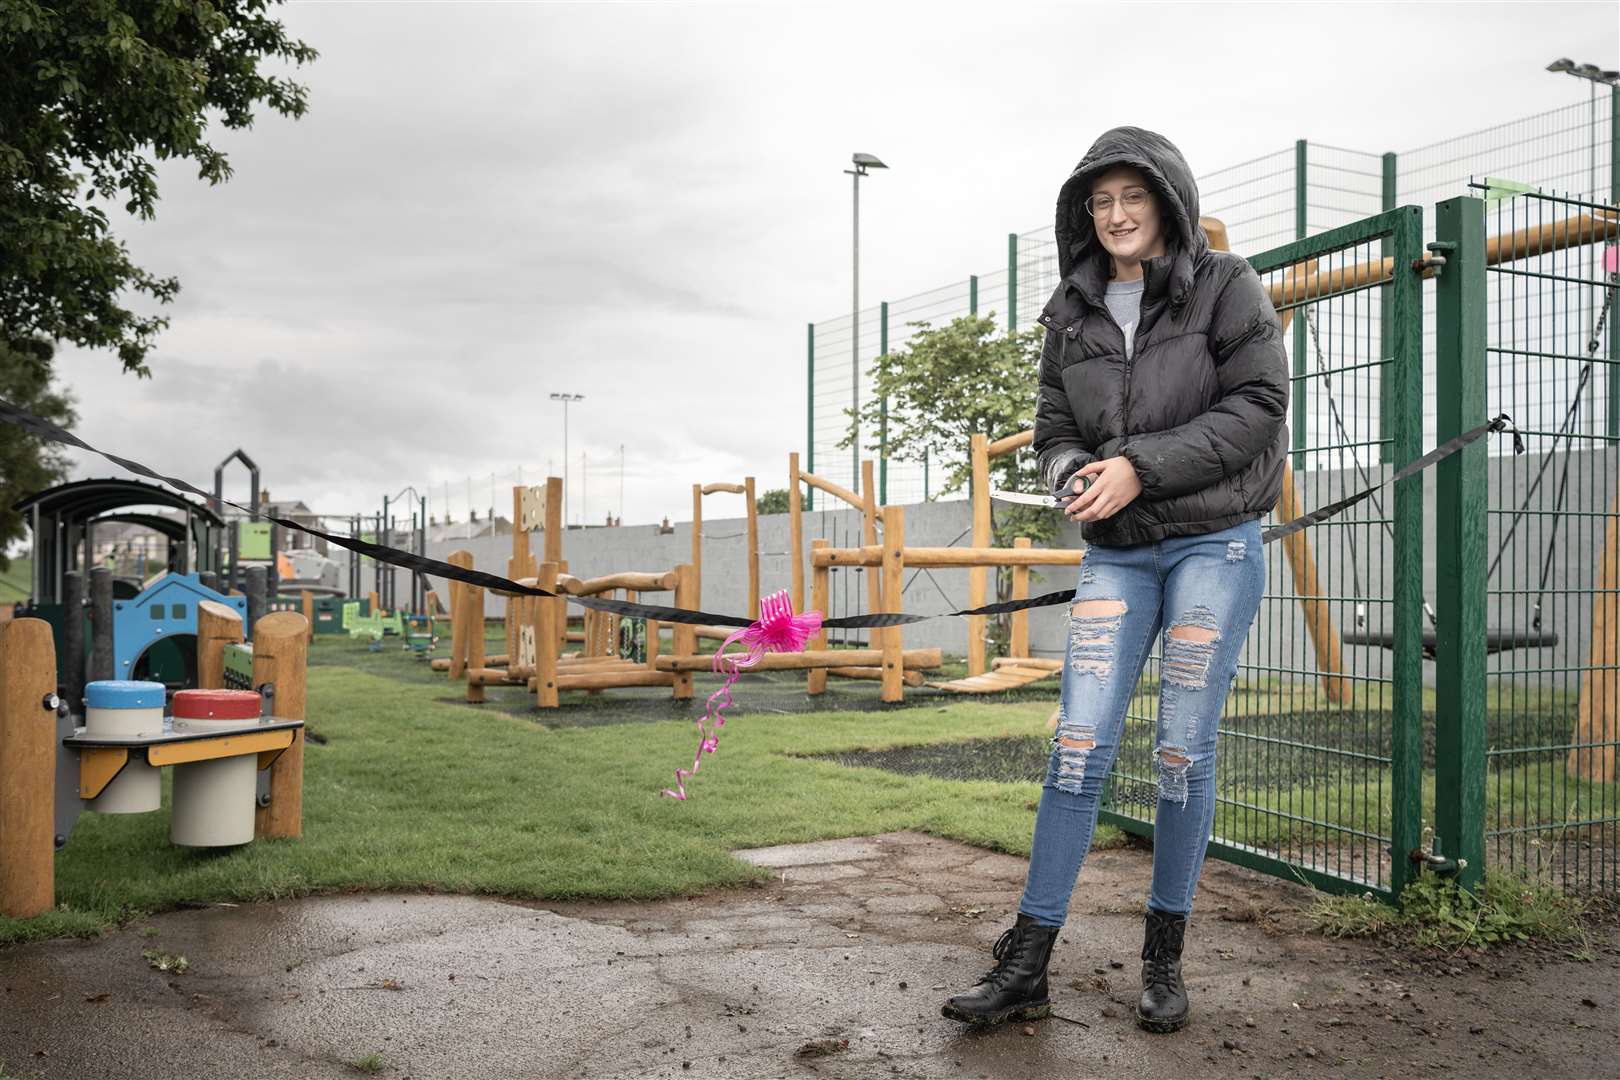 Maisie Mackintosh is poised to cut the ribbon and declare the final phase of the play park open. Picture: Ewen Pryde